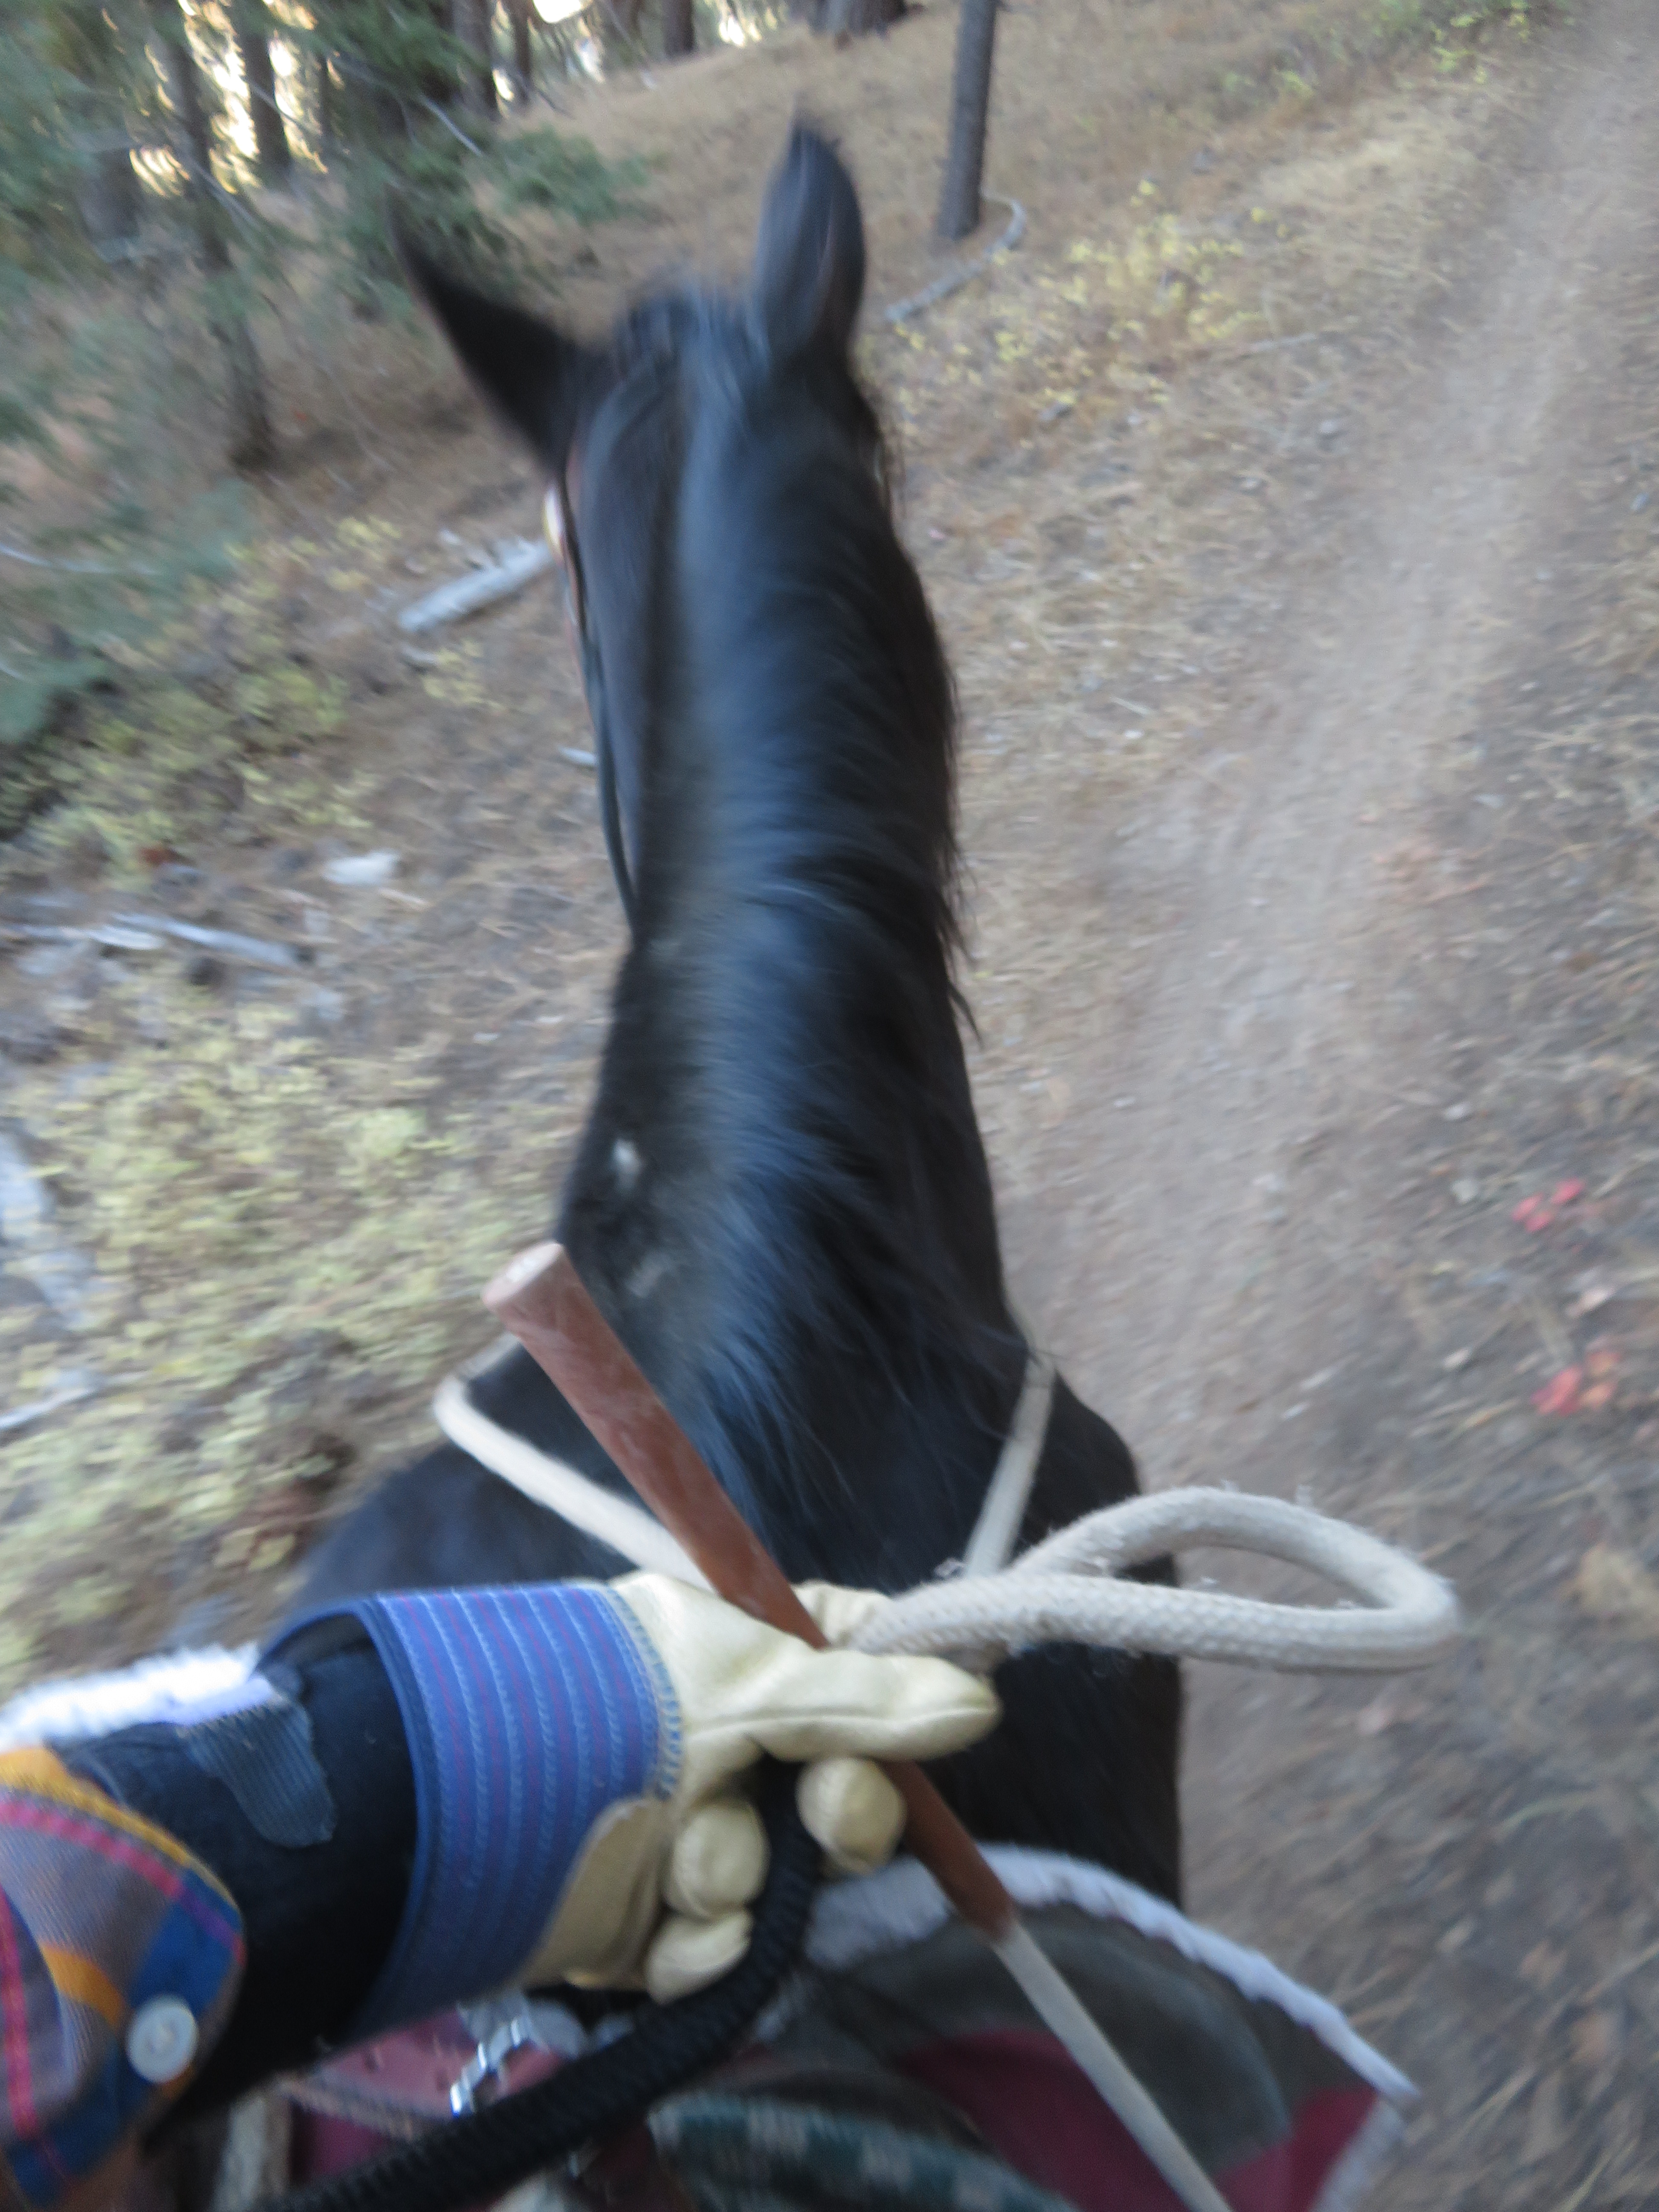 Strong hands, soft on the reins